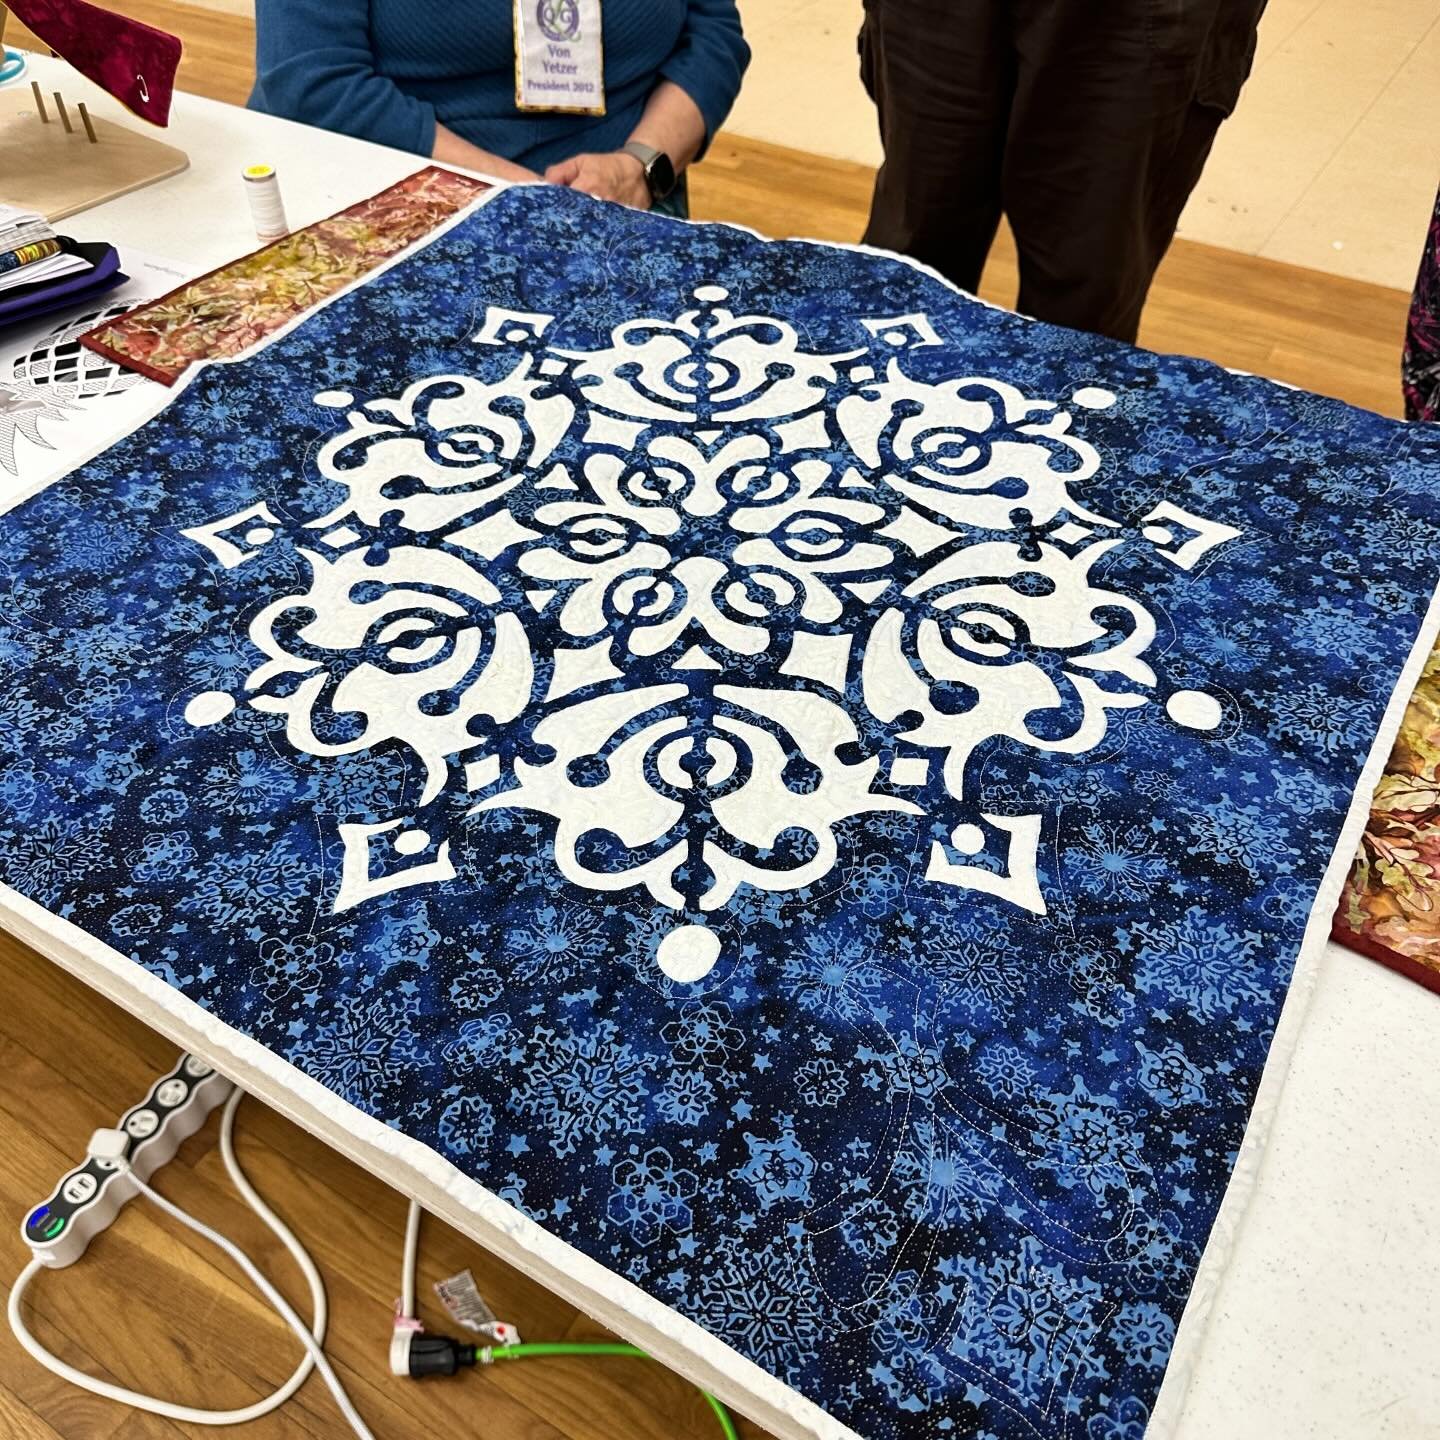 Quilt inspiration from a customer&rsquo;s creations.  While at teaching for the @longmontquiltguild Gail brought in her  beautifully made pieces of two Eye of the Beholder Quilt Design patterns. 1. Frozen Wonder Medallion VIII (30&rdquo; x 30&rdquo;)